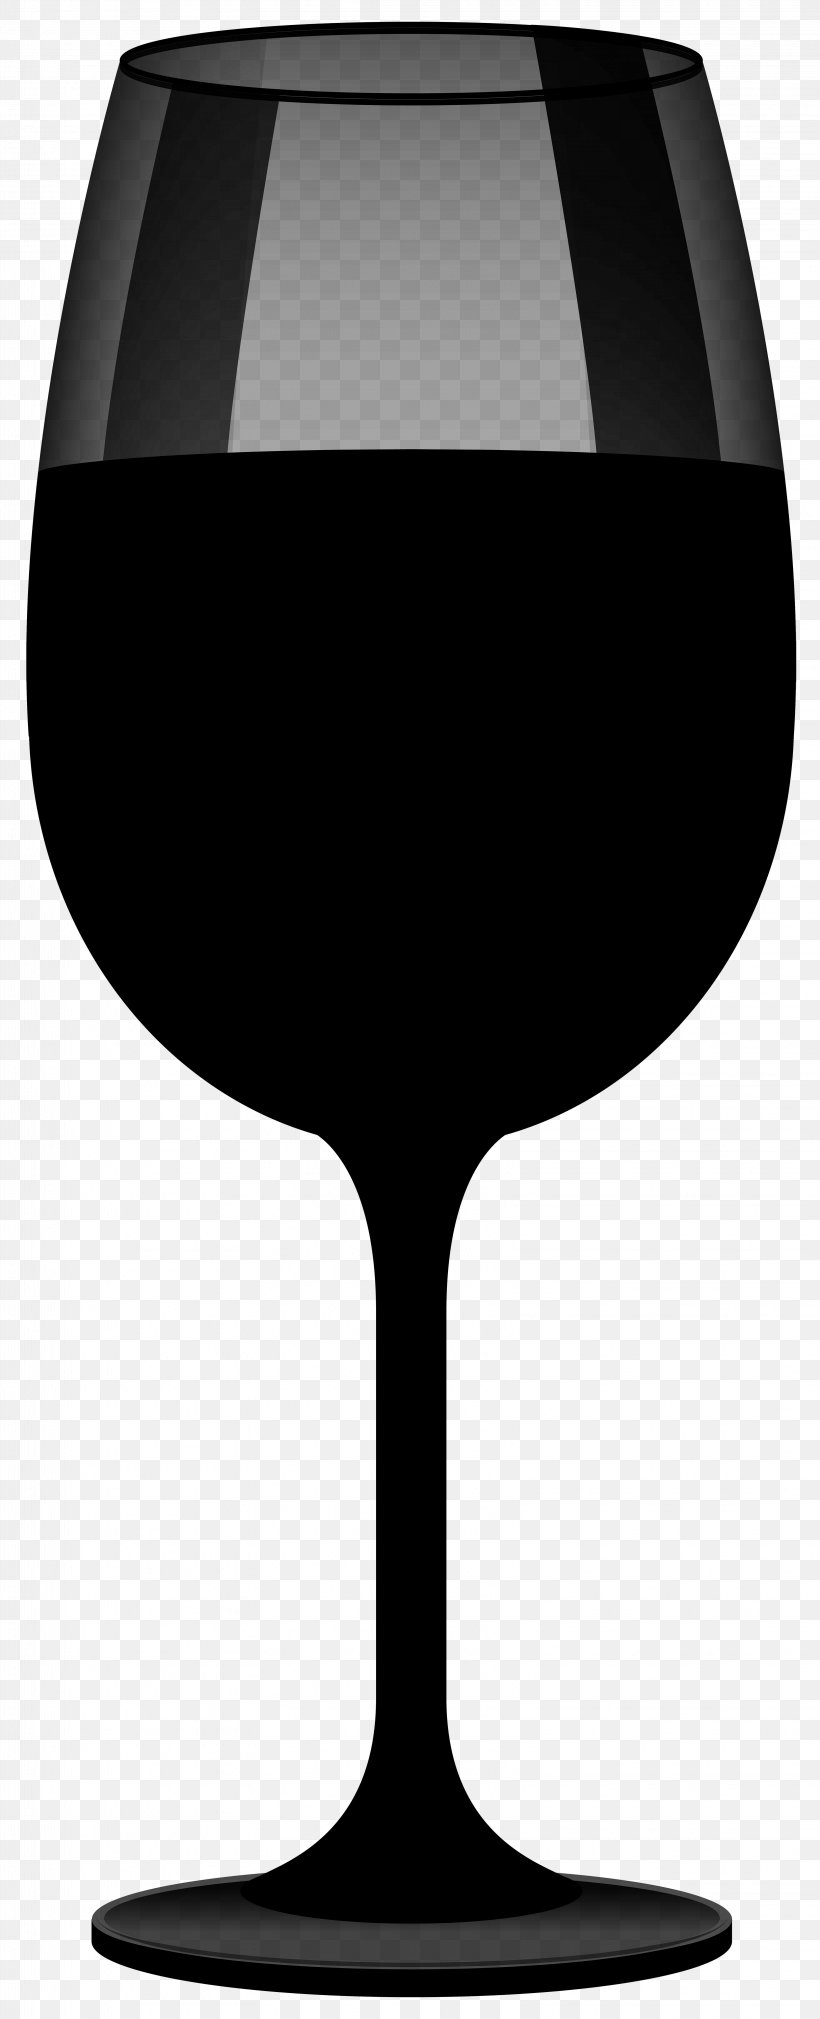 Wine Glass Champagne Glass Product Design, PNG, 3249x8000px, Wine Glass, Blackandwhite, Champagne Glass, Drinkware, Glass Download Free